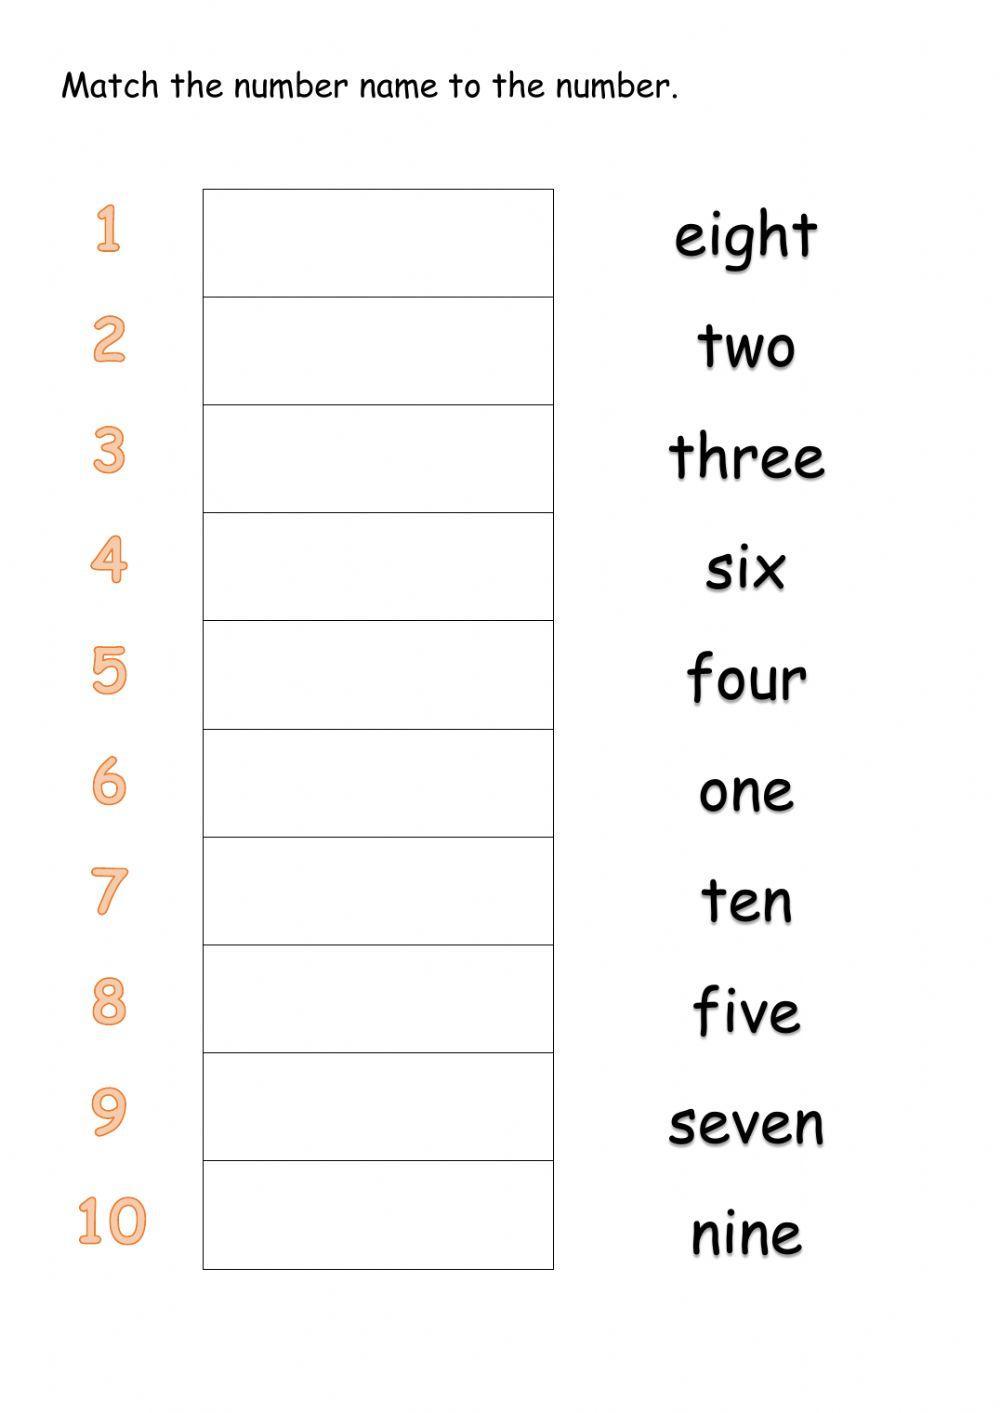 Number Names 1 to 30  1 to 30 Number Names and Worksheet